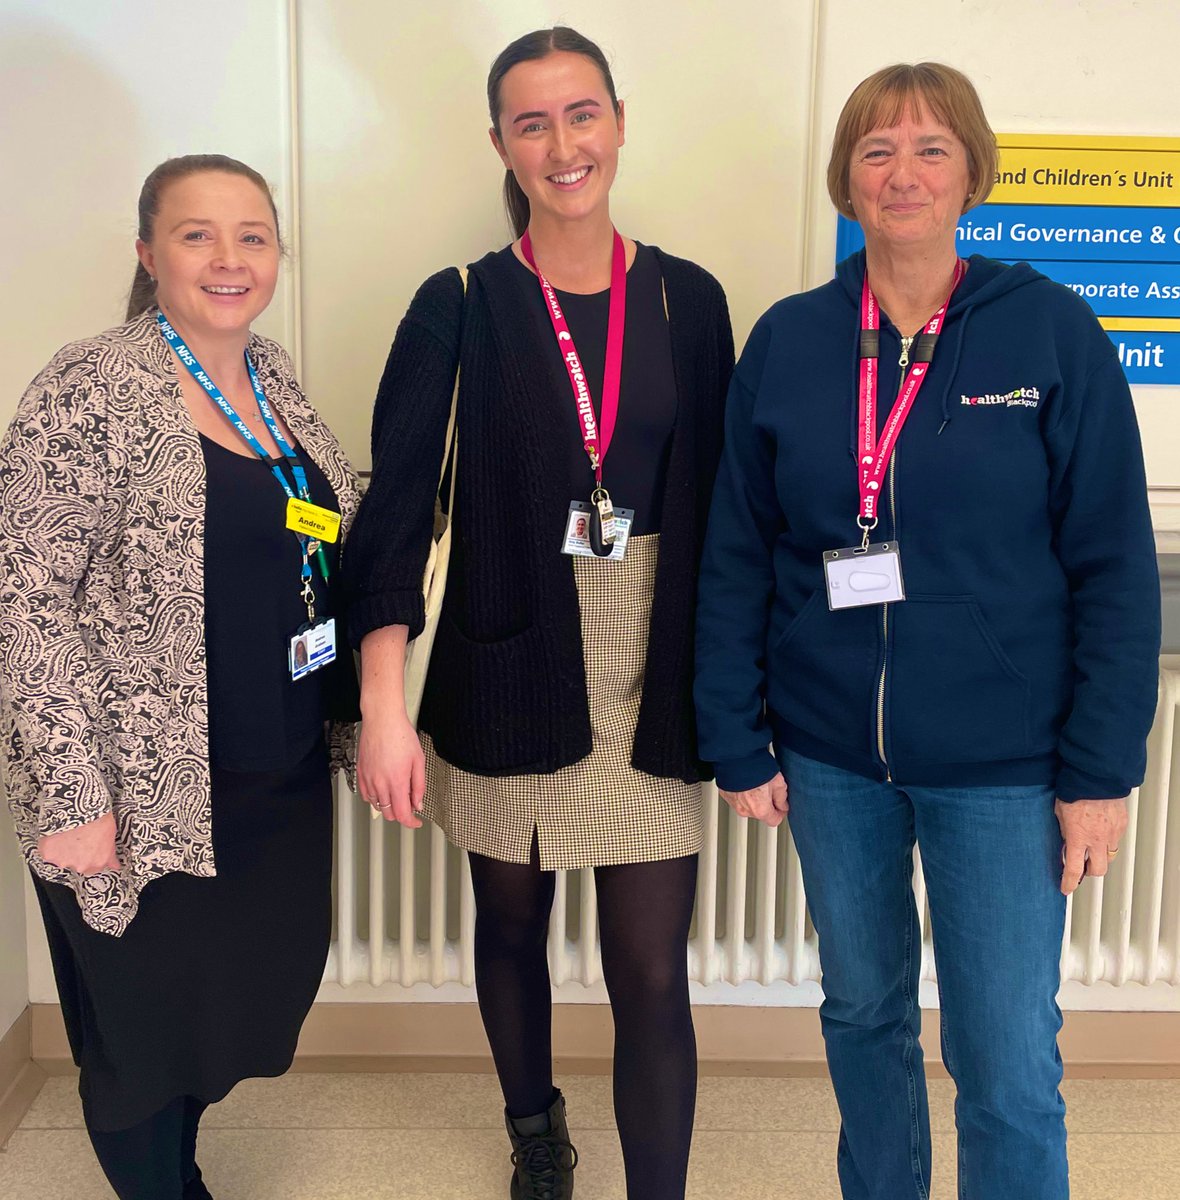 @BlackpoolHosp welcomes @HealthwatchBpl to our Maternity department. They are spending the morning engaging with patients and gathering independent feedback 😊